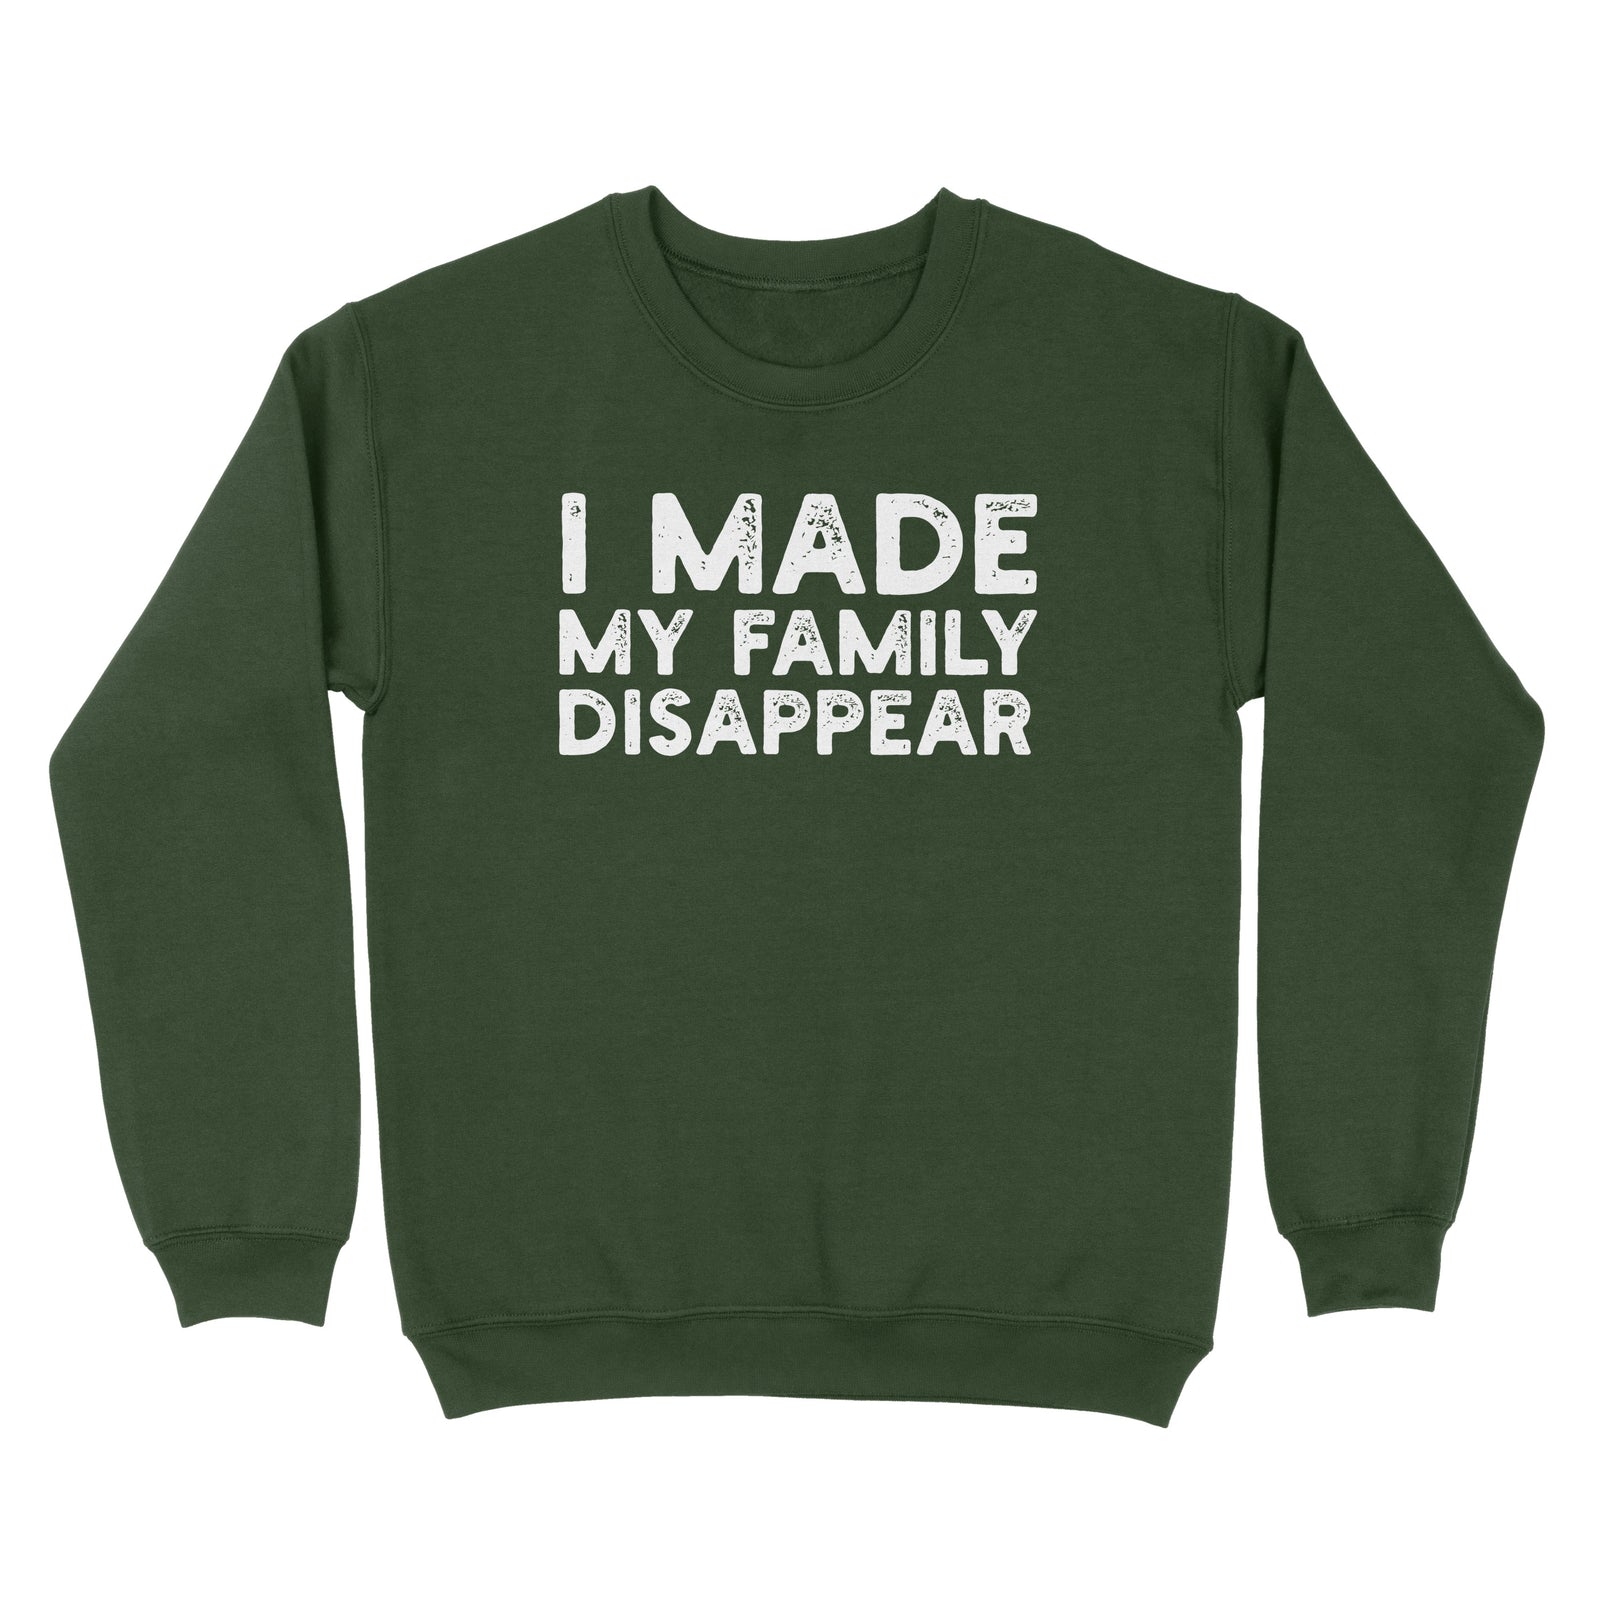 //cdn.shopify.com/s/files/1/0274/2488/2766/products/i-made-my-family-disappear-ugly-sweater-257374_5000x.jpg?v=1607163774 5000w,
    //cdn.shopify.com/s/files/1/0274/2488/2766/products/i-made-my-family-disappear-ugly-sweater-257374_4500x.jpg?v=1607163774 4500w,
    //cdn.shopify.com/s/files/1/0274/2488/2766/products/i-made-my-family-disappear-ugly-sweater-257374_4000x.jpg?v=1607163774 4000w,
    //cdn.shopify.com/s/files/1/0274/2488/2766/products/i-made-my-family-disappear-ugly-sweater-257374_3500x.jpg?v=1607163774 3500w,
    //cdn.shopify.com/s/files/1/0274/2488/2766/products/i-made-my-family-disappear-ugly-sweater-257374_3000x.jpg?v=1607163774 3000w,
    //cdn.shopify.com/s/files/1/0274/2488/2766/products/i-made-my-family-disappear-ugly-sweater-257374_2500x.jpg?v=1607163774 2500w,
    //cdn.shopify.com/s/files/1/0274/2488/2766/products/i-made-my-family-disappear-ugly-sweater-257374_2000x.jpg?v=1607163774 2000w,
    //cdn.shopify.com/s/files/1/0274/2488/2766/products/i-made-my-family-disappear-ugly-sweater-257374_1800x.jpg?v=1607163774 1800w,
    //cdn.shopify.com/s/files/1/0274/2488/2766/products/i-made-my-family-disappear-ugly-sweater-257374_1600x.jpg?v=1607163774 1600w,
    //cdn.shopify.com/s/files/1/0274/2488/2766/products/i-made-my-family-disappear-ugly-sweater-257374_1400x.jpg?v=1607163774 1400w,
    //cdn.shopify.com/s/files/1/0274/2488/2766/products/i-made-my-family-disappear-ugly-sweater-257374_1200x.jpg?v=1607163774 1200w,
    //cdn.shopify.com/s/files/1/0274/2488/2766/products/i-made-my-family-disappear-ugly-sweater-257374_1000x.jpg?v=1607163774 1000w,
    //cdn.shopify.com/s/files/1/0274/2488/2766/products/i-made-my-family-disappear-ugly-sweater-257374_800x.jpg?v=1607163774 800w,
    //cdn.shopify.com/s/files/1/0274/2488/2766/products/i-made-my-family-disappear-ugly-sweater-257374_600x.jpg?v=1607163774 600w,
    //cdn.shopify.com/s/files/1/0274/2488/2766/products/i-made-my-family-disappear-ugly-sweater-257374_400x.jpg?v=1607163774 400w,
    //cdn.shopify.com/s/files/1/0274/2488/2766/products/i-made-my-family-disappear-ugly-sweater-257374_200x.jpg?v=1607163774 200w